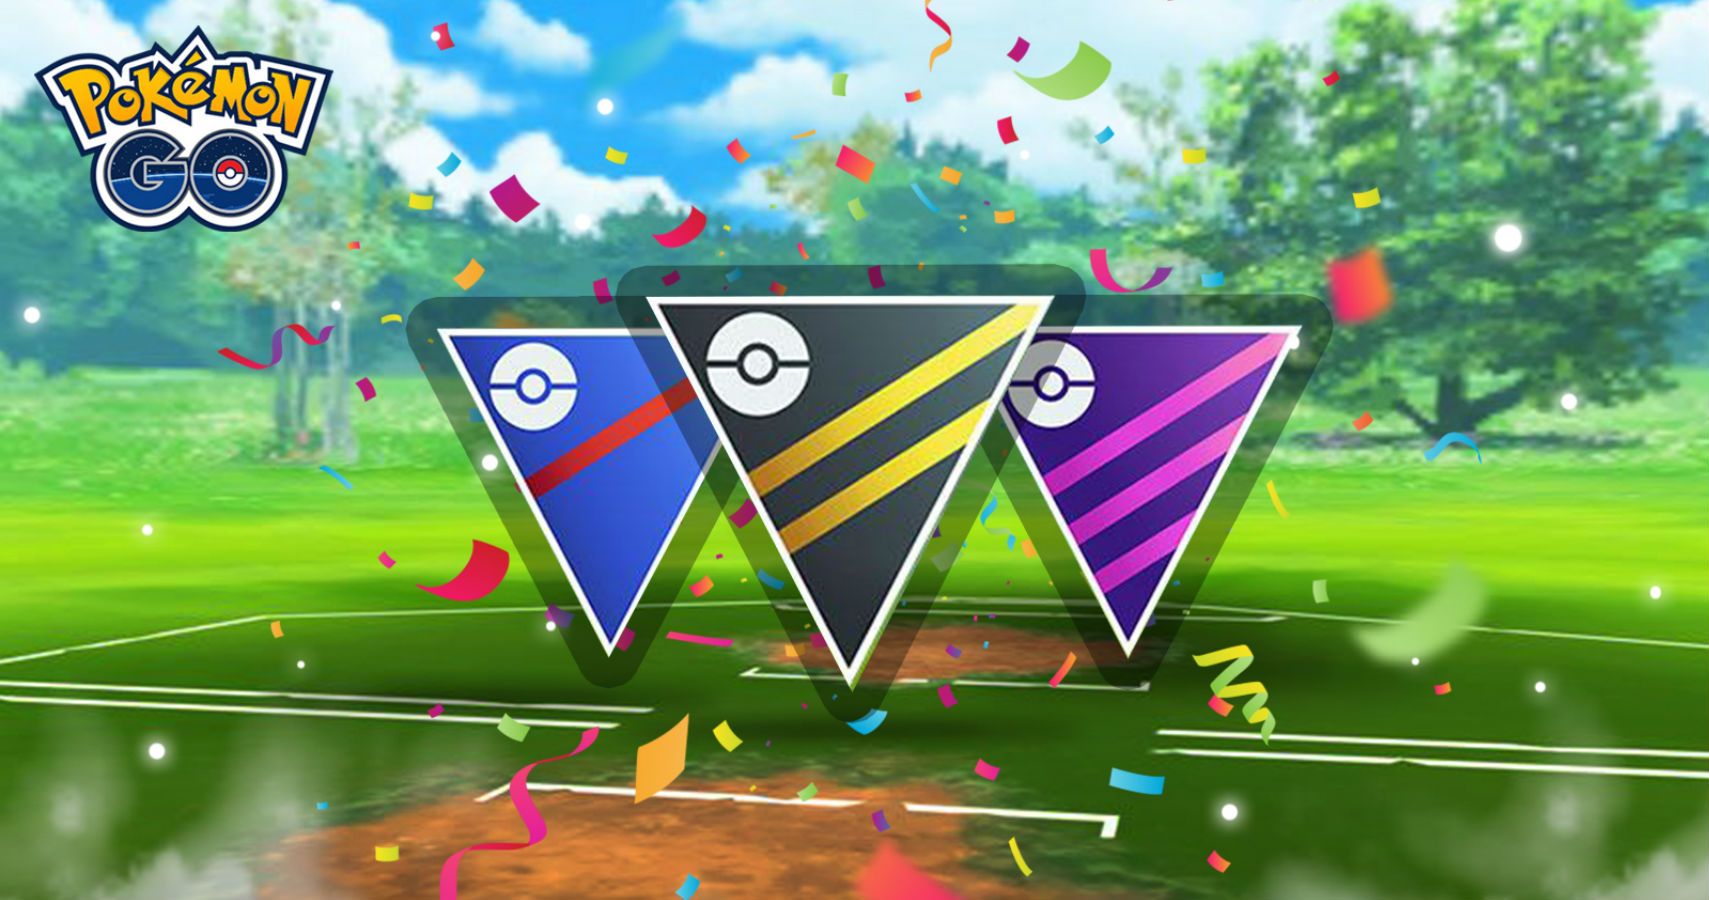 Pokémon Go Battle League: Everything you need to know